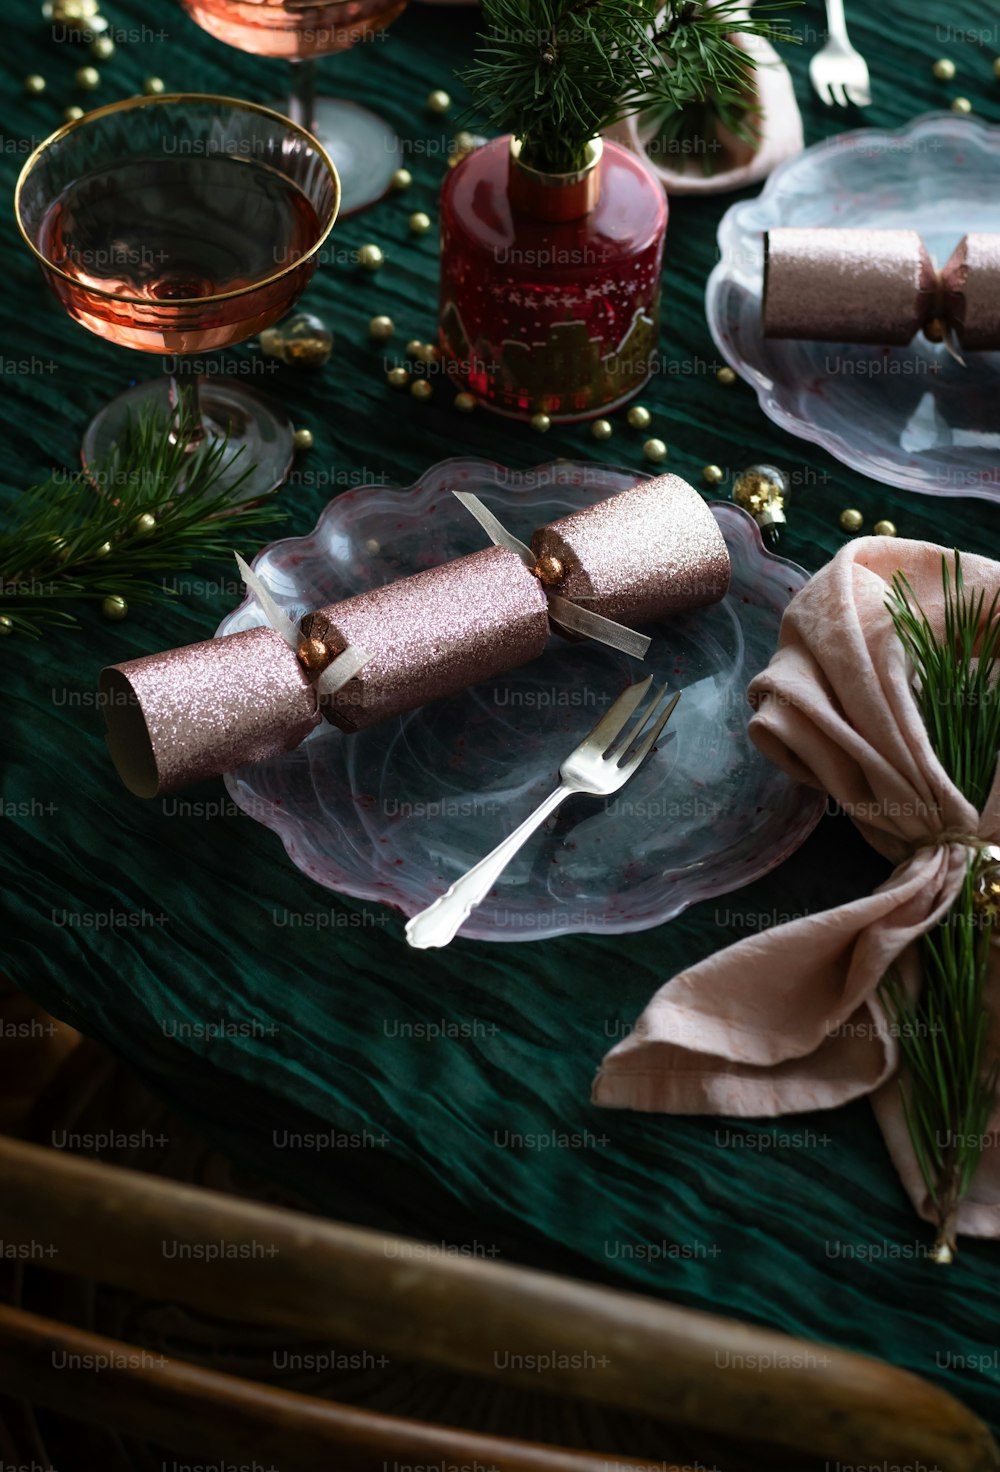 a table set for a holiday dinner with napkins and napkins